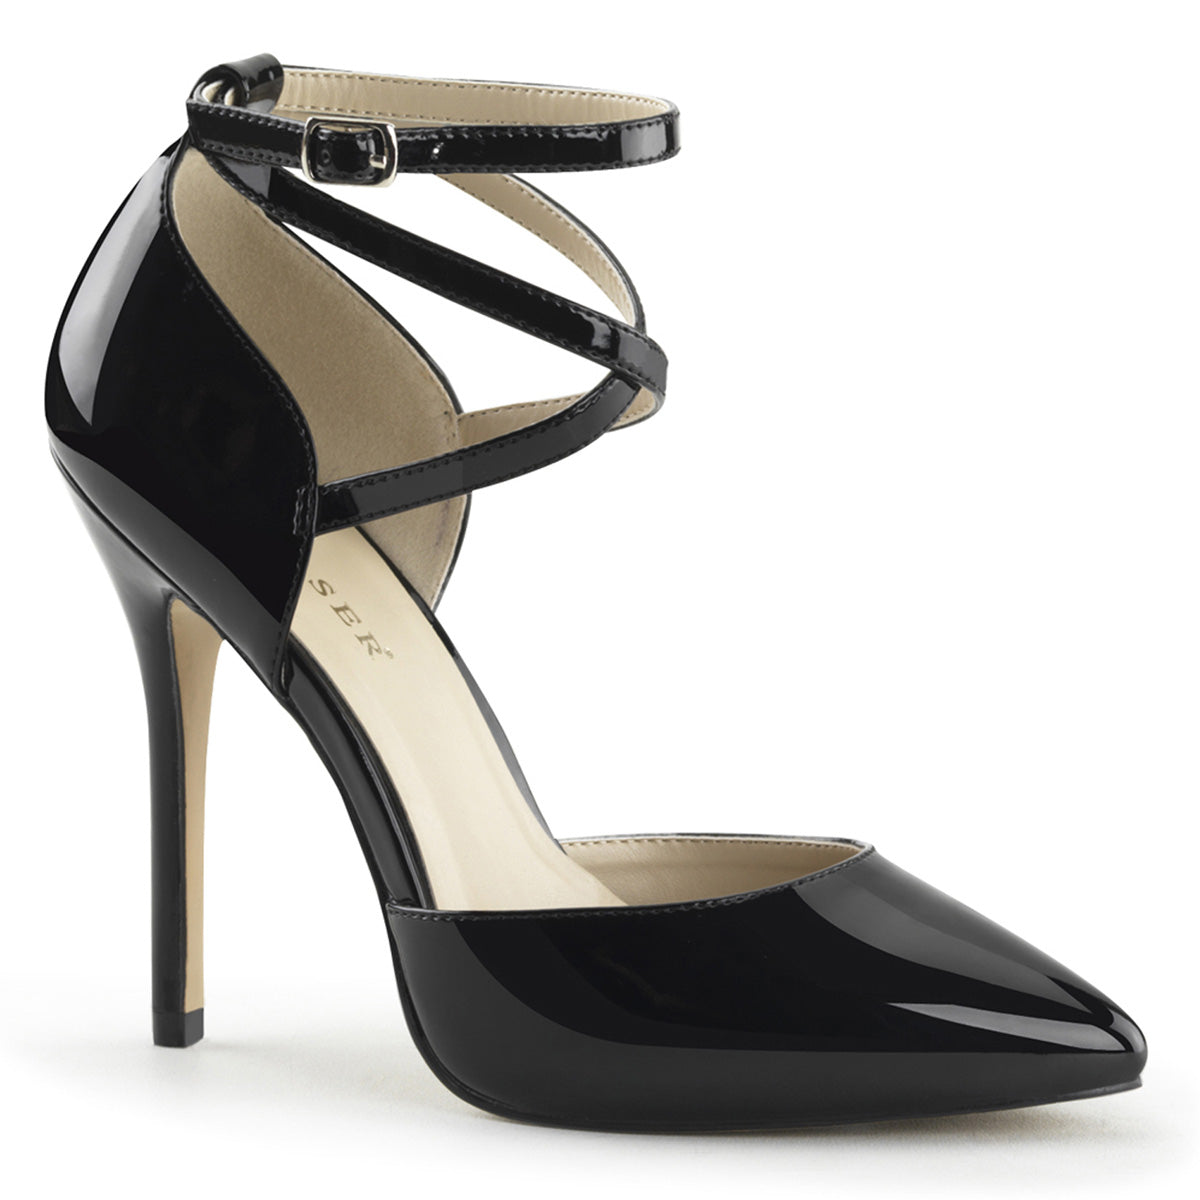 AMUSE-25 Ankle Court High Heel